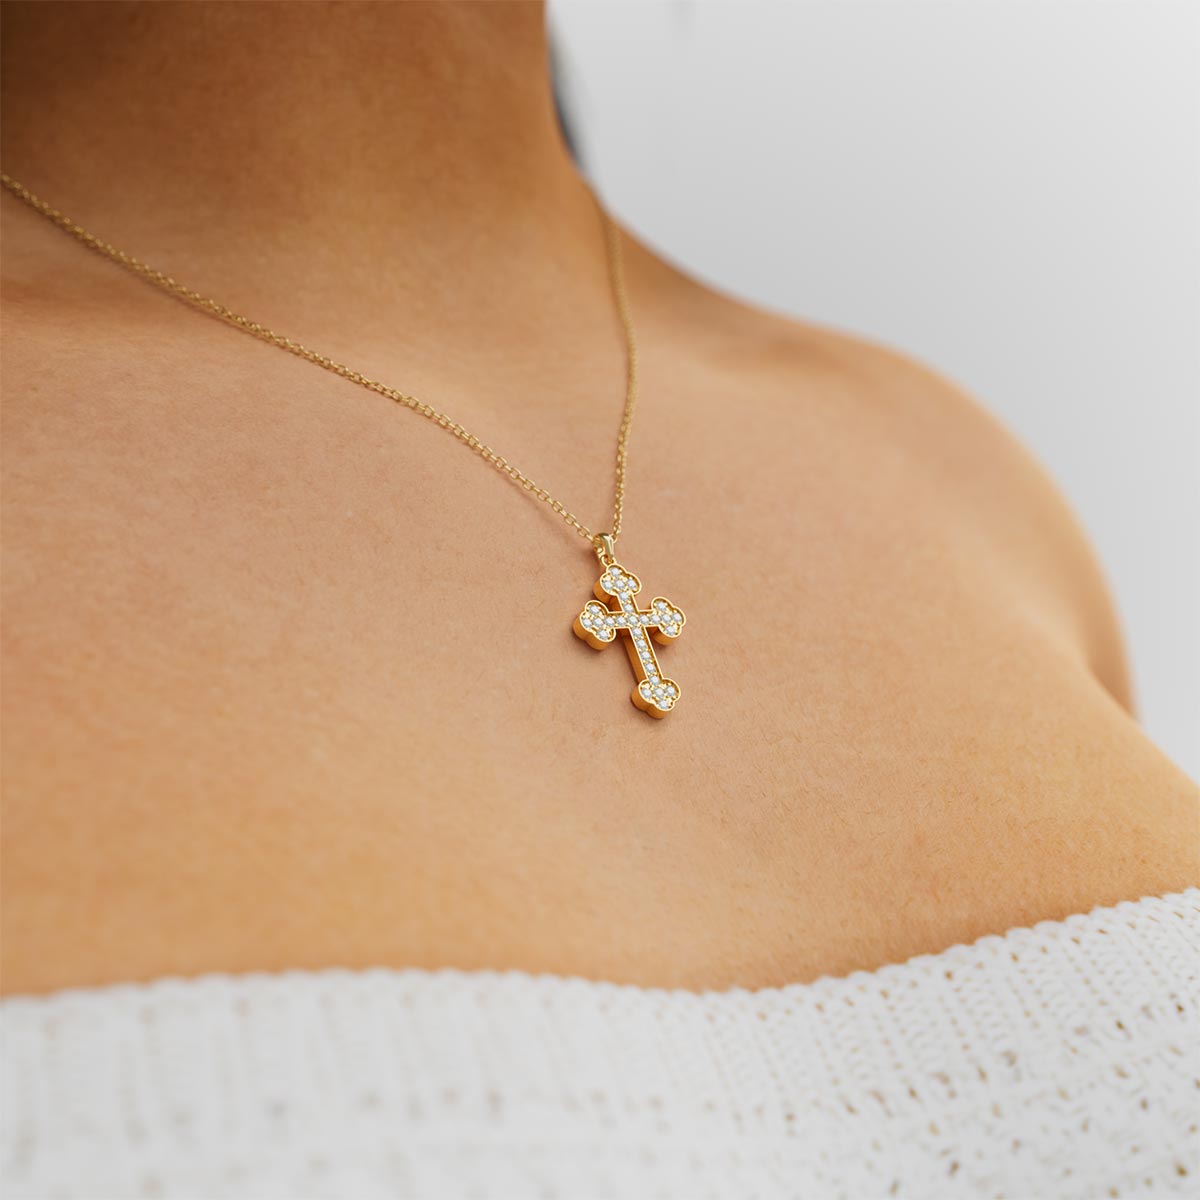 Greek Orthodox Two-Sided Pavé Cross Necklace